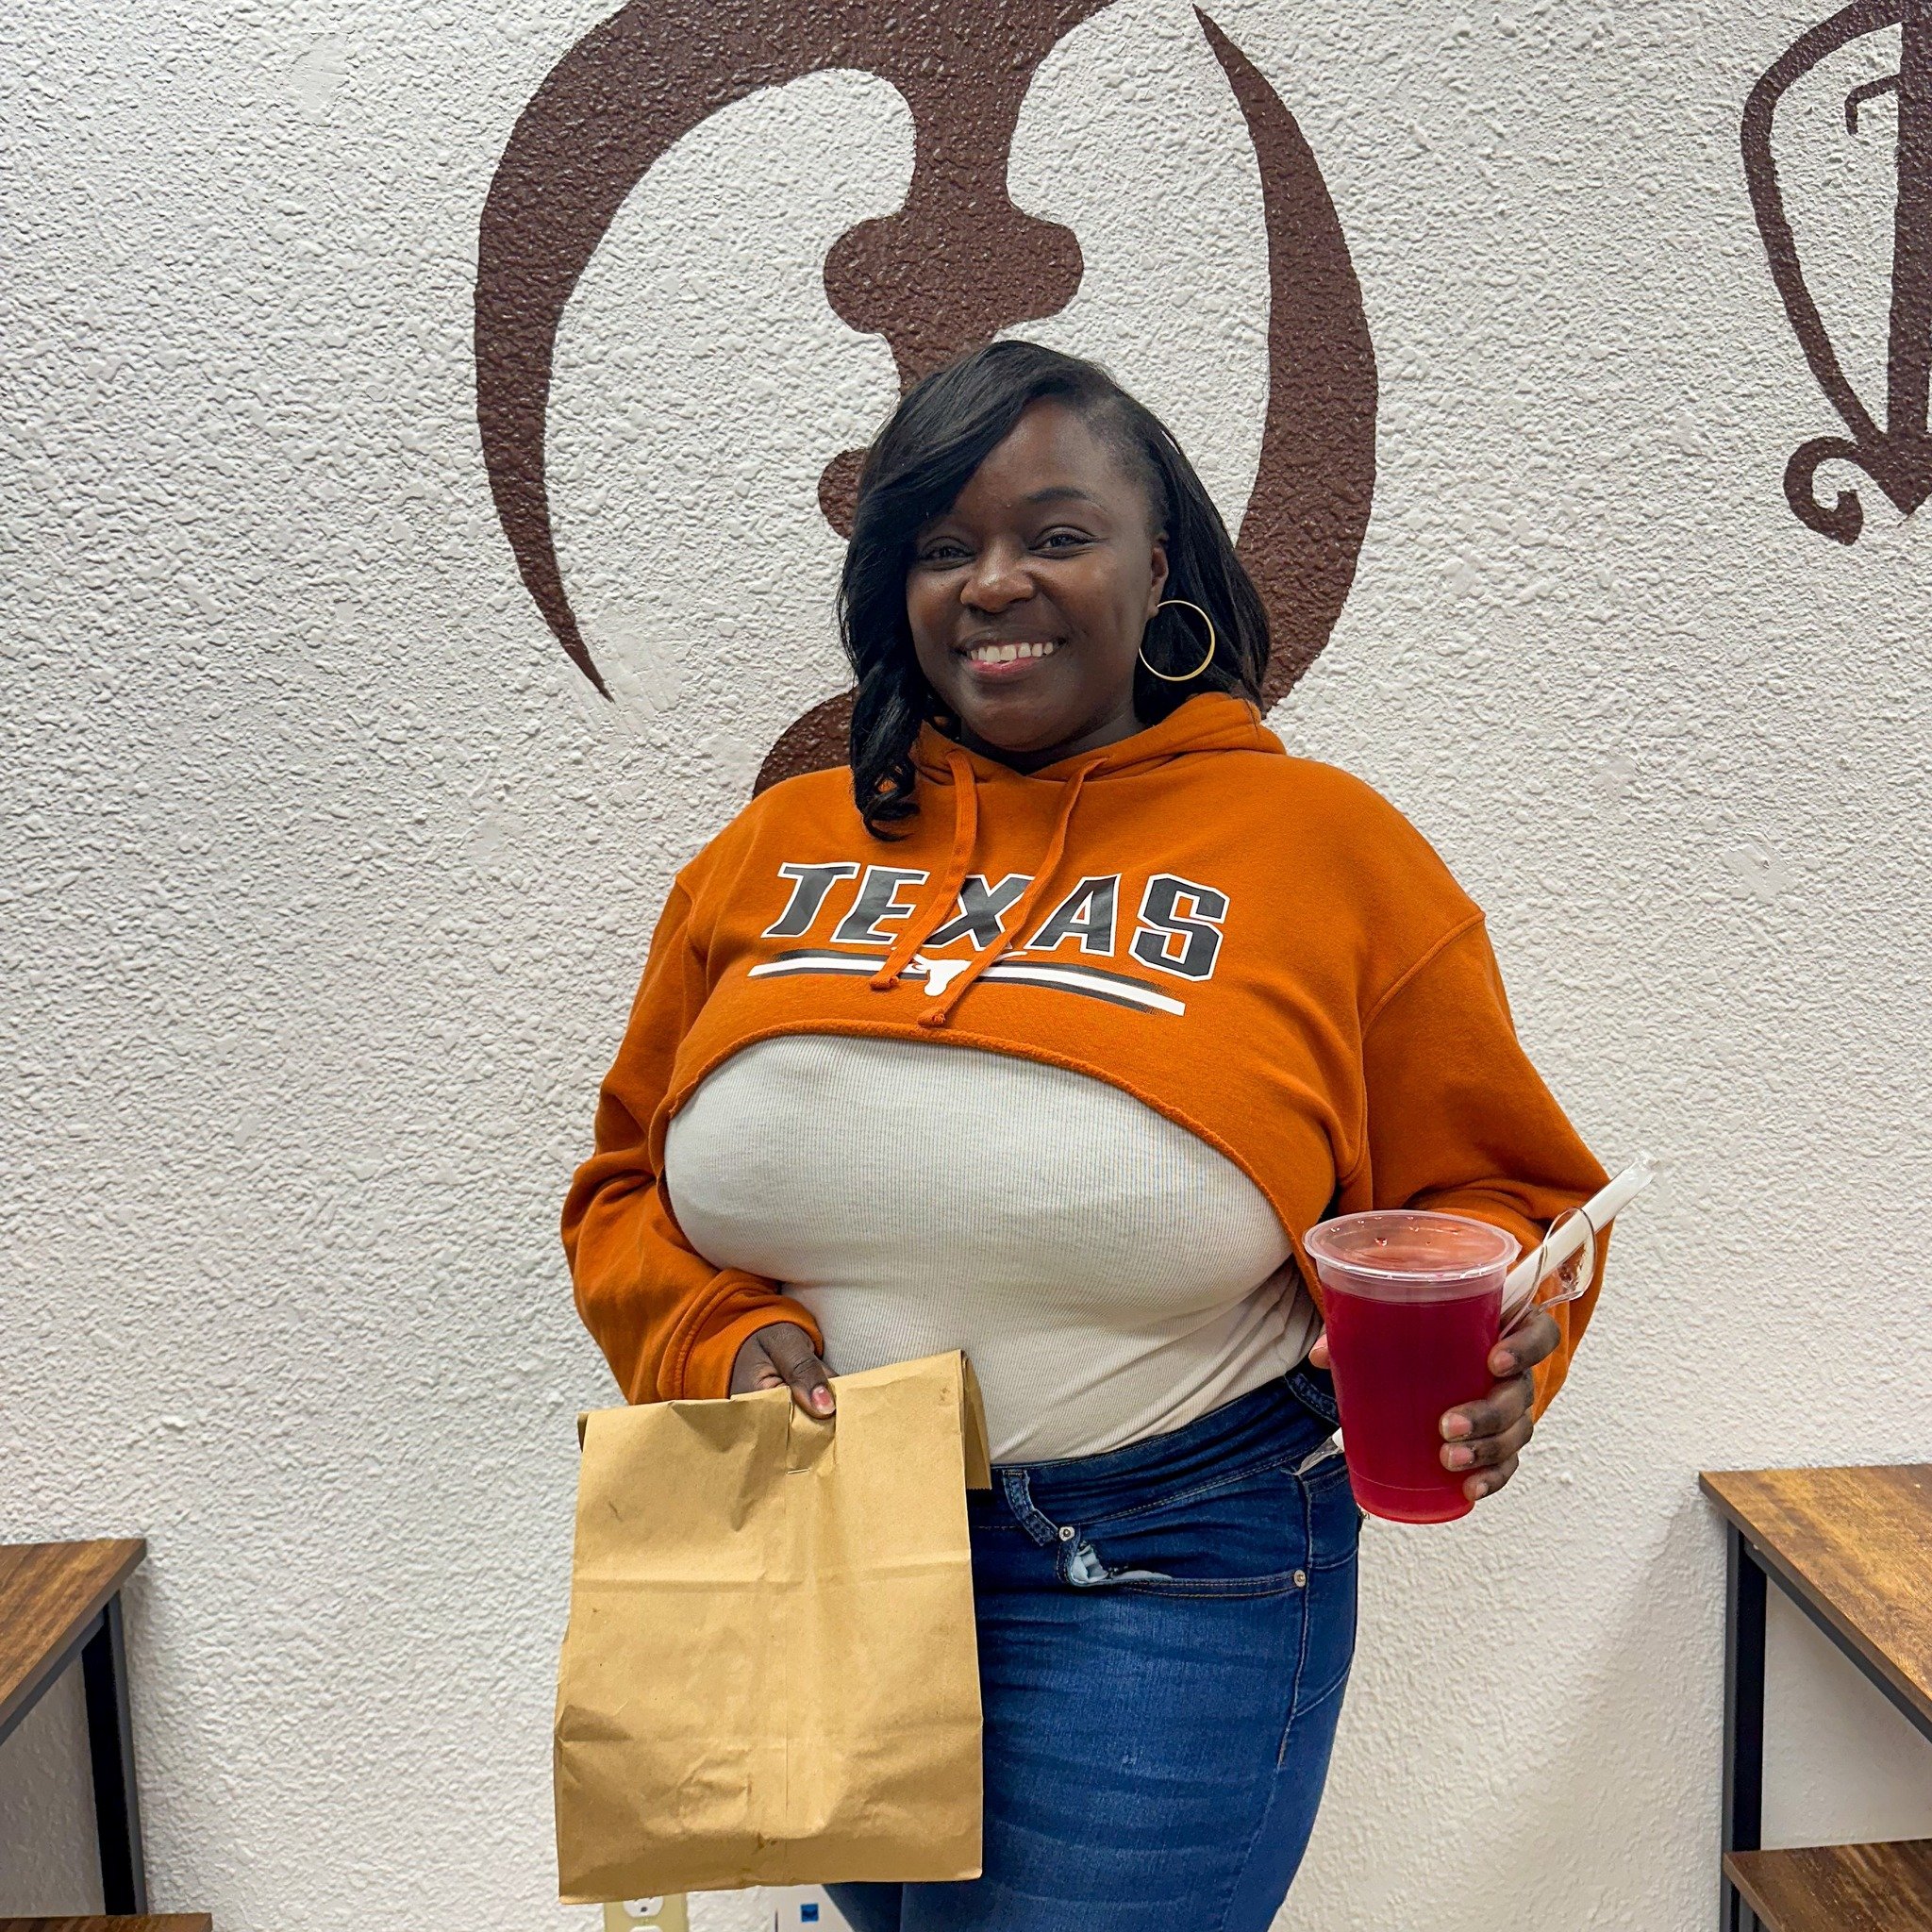 Big thanks to Magenta for choosing #MenuSixFusion and enjoying our delicious Fusion Suya bowl! We appreciate your support and look forward to serving you again soon. 🍲😊 #Suya #Desoto #Dfw #Dallas #DFWeats